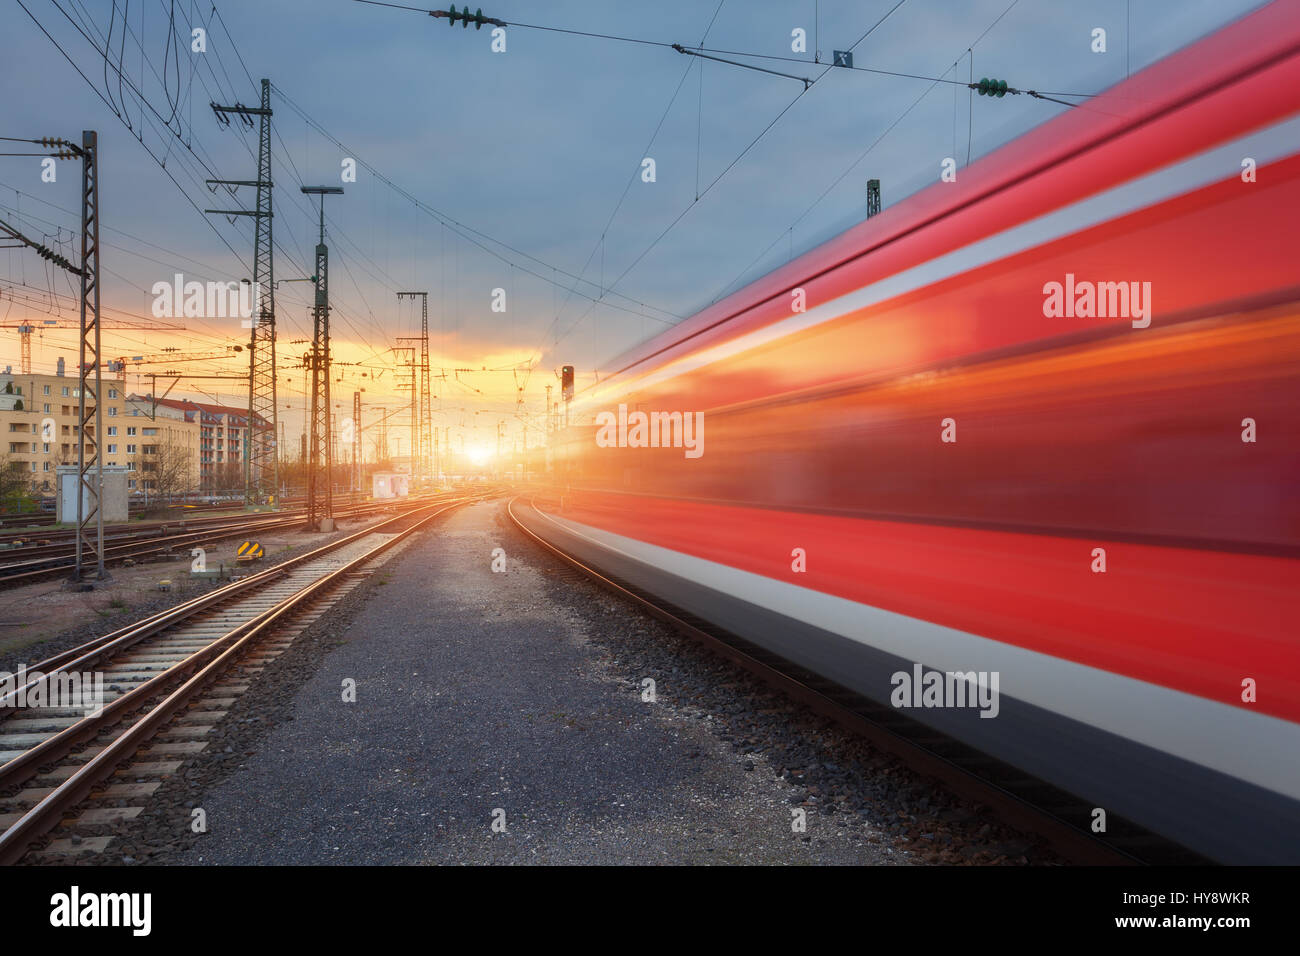 High speed red passenger train on railroad track in motion at sunset. Blurred commuter train on the railway station and sunlight. Railroad travel, rai Stock Photo